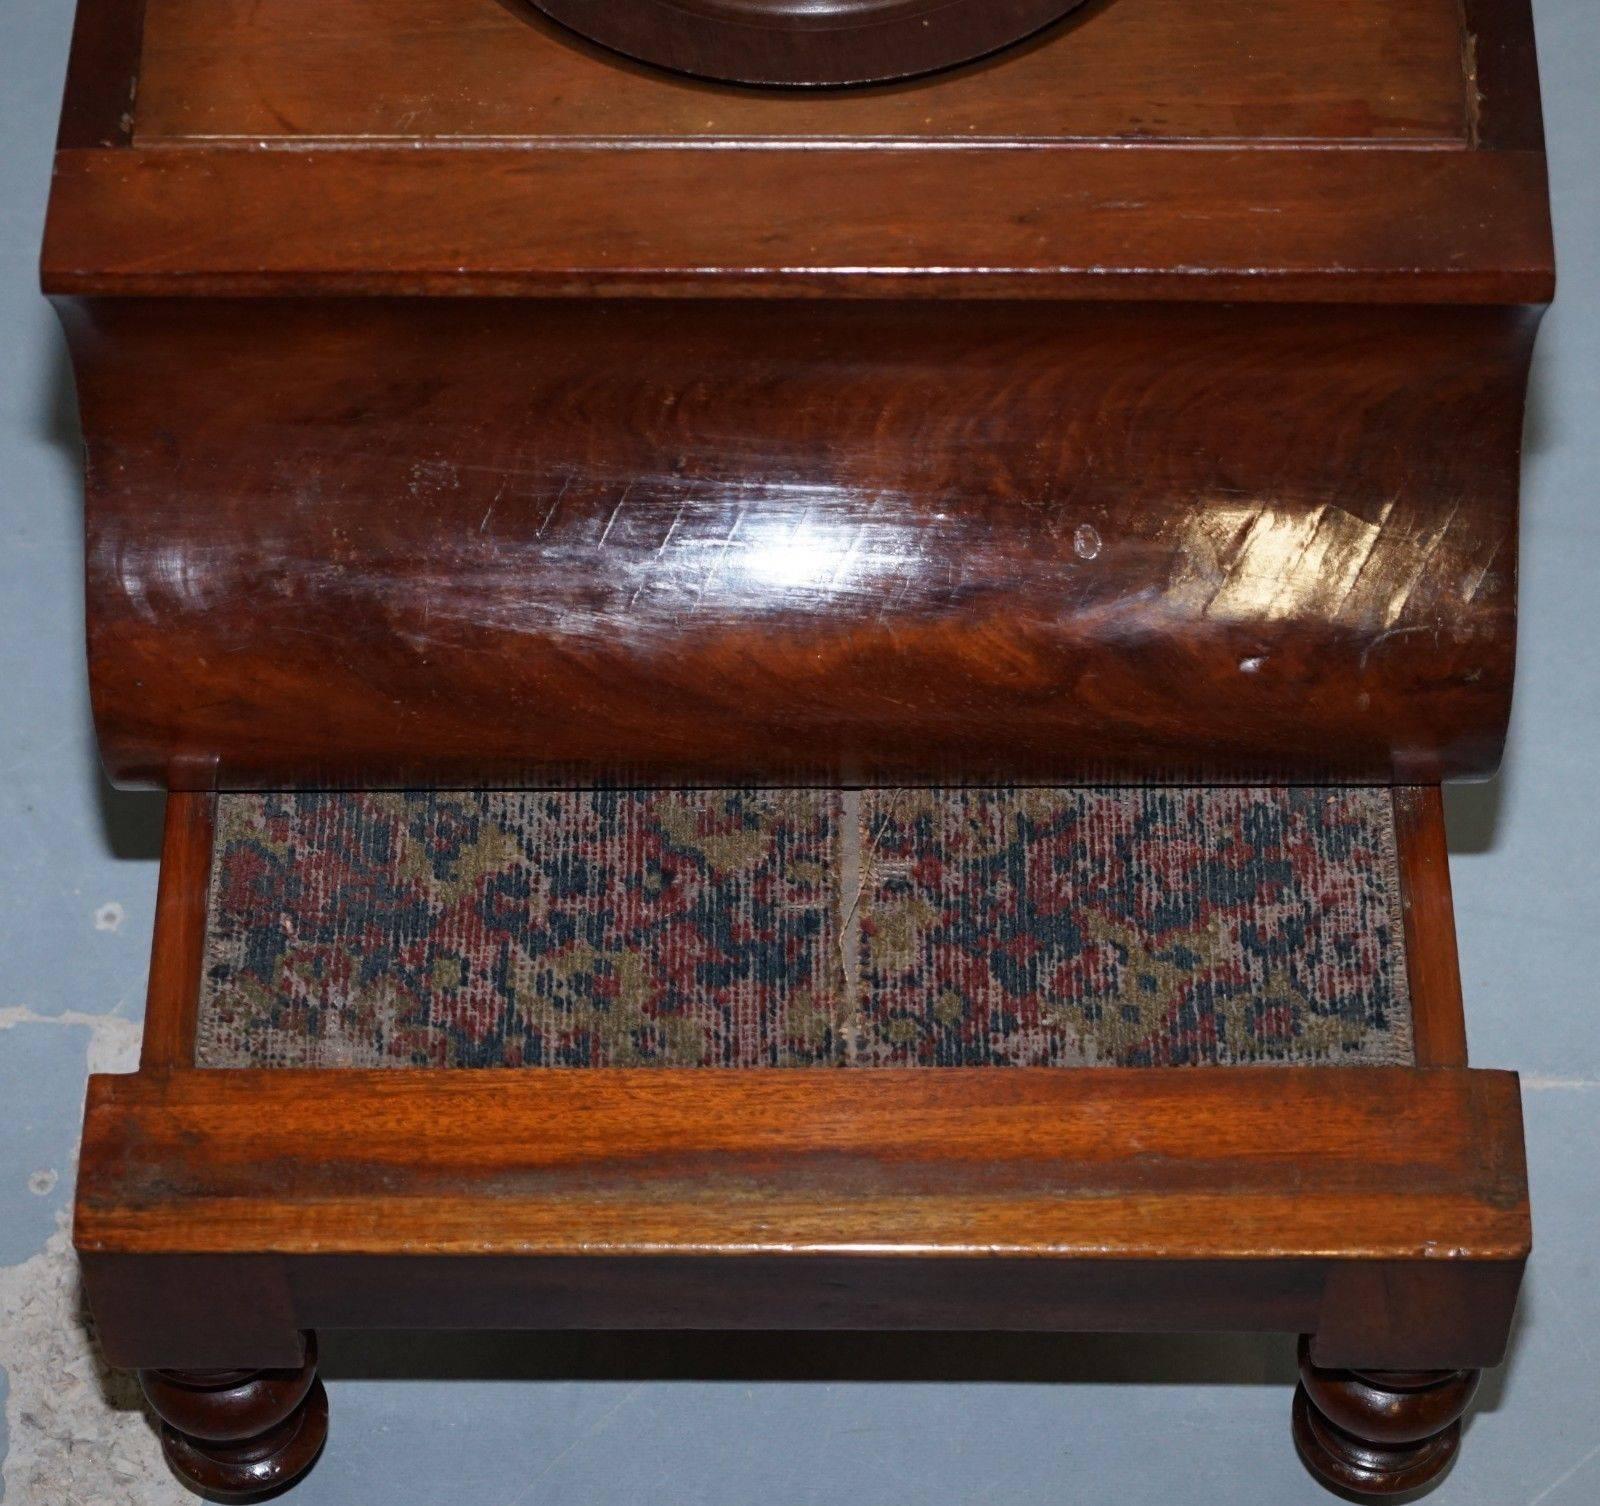 Mahogany Rare Fully Complete Victorian American Bed Step Stool with Built in Chamber Pot